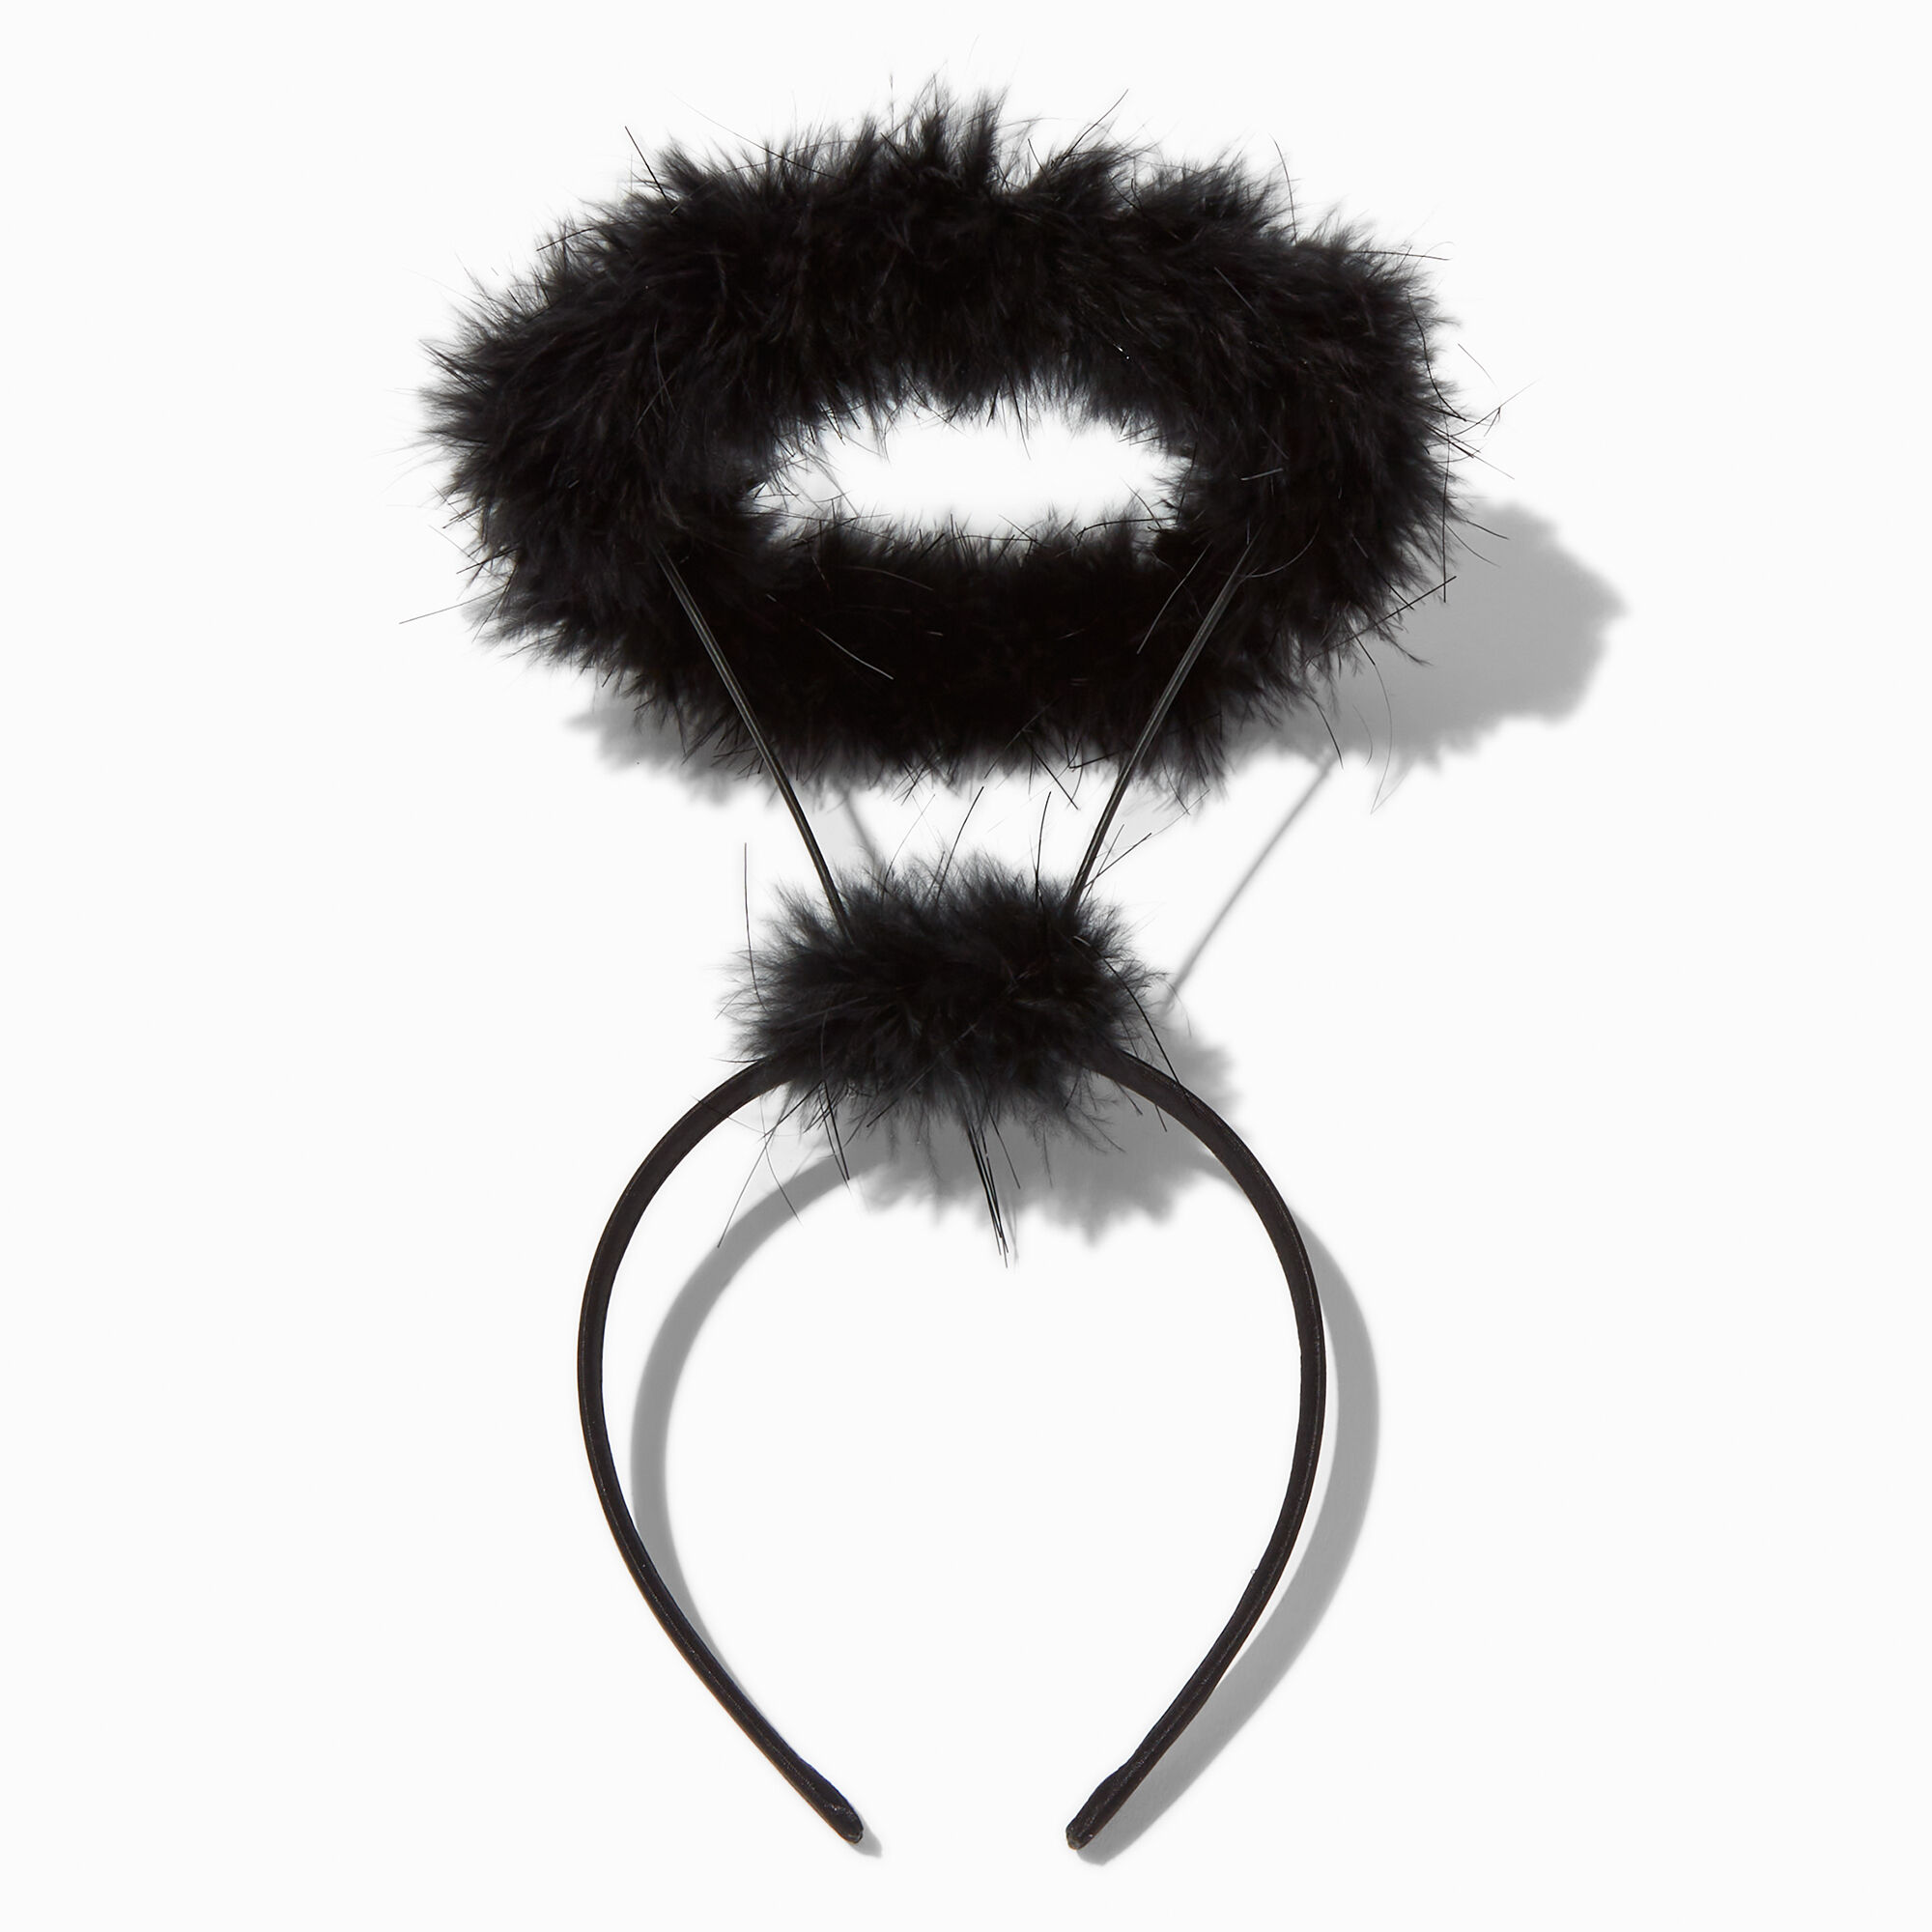 View Claires Feather Angel Halo Headband Black information